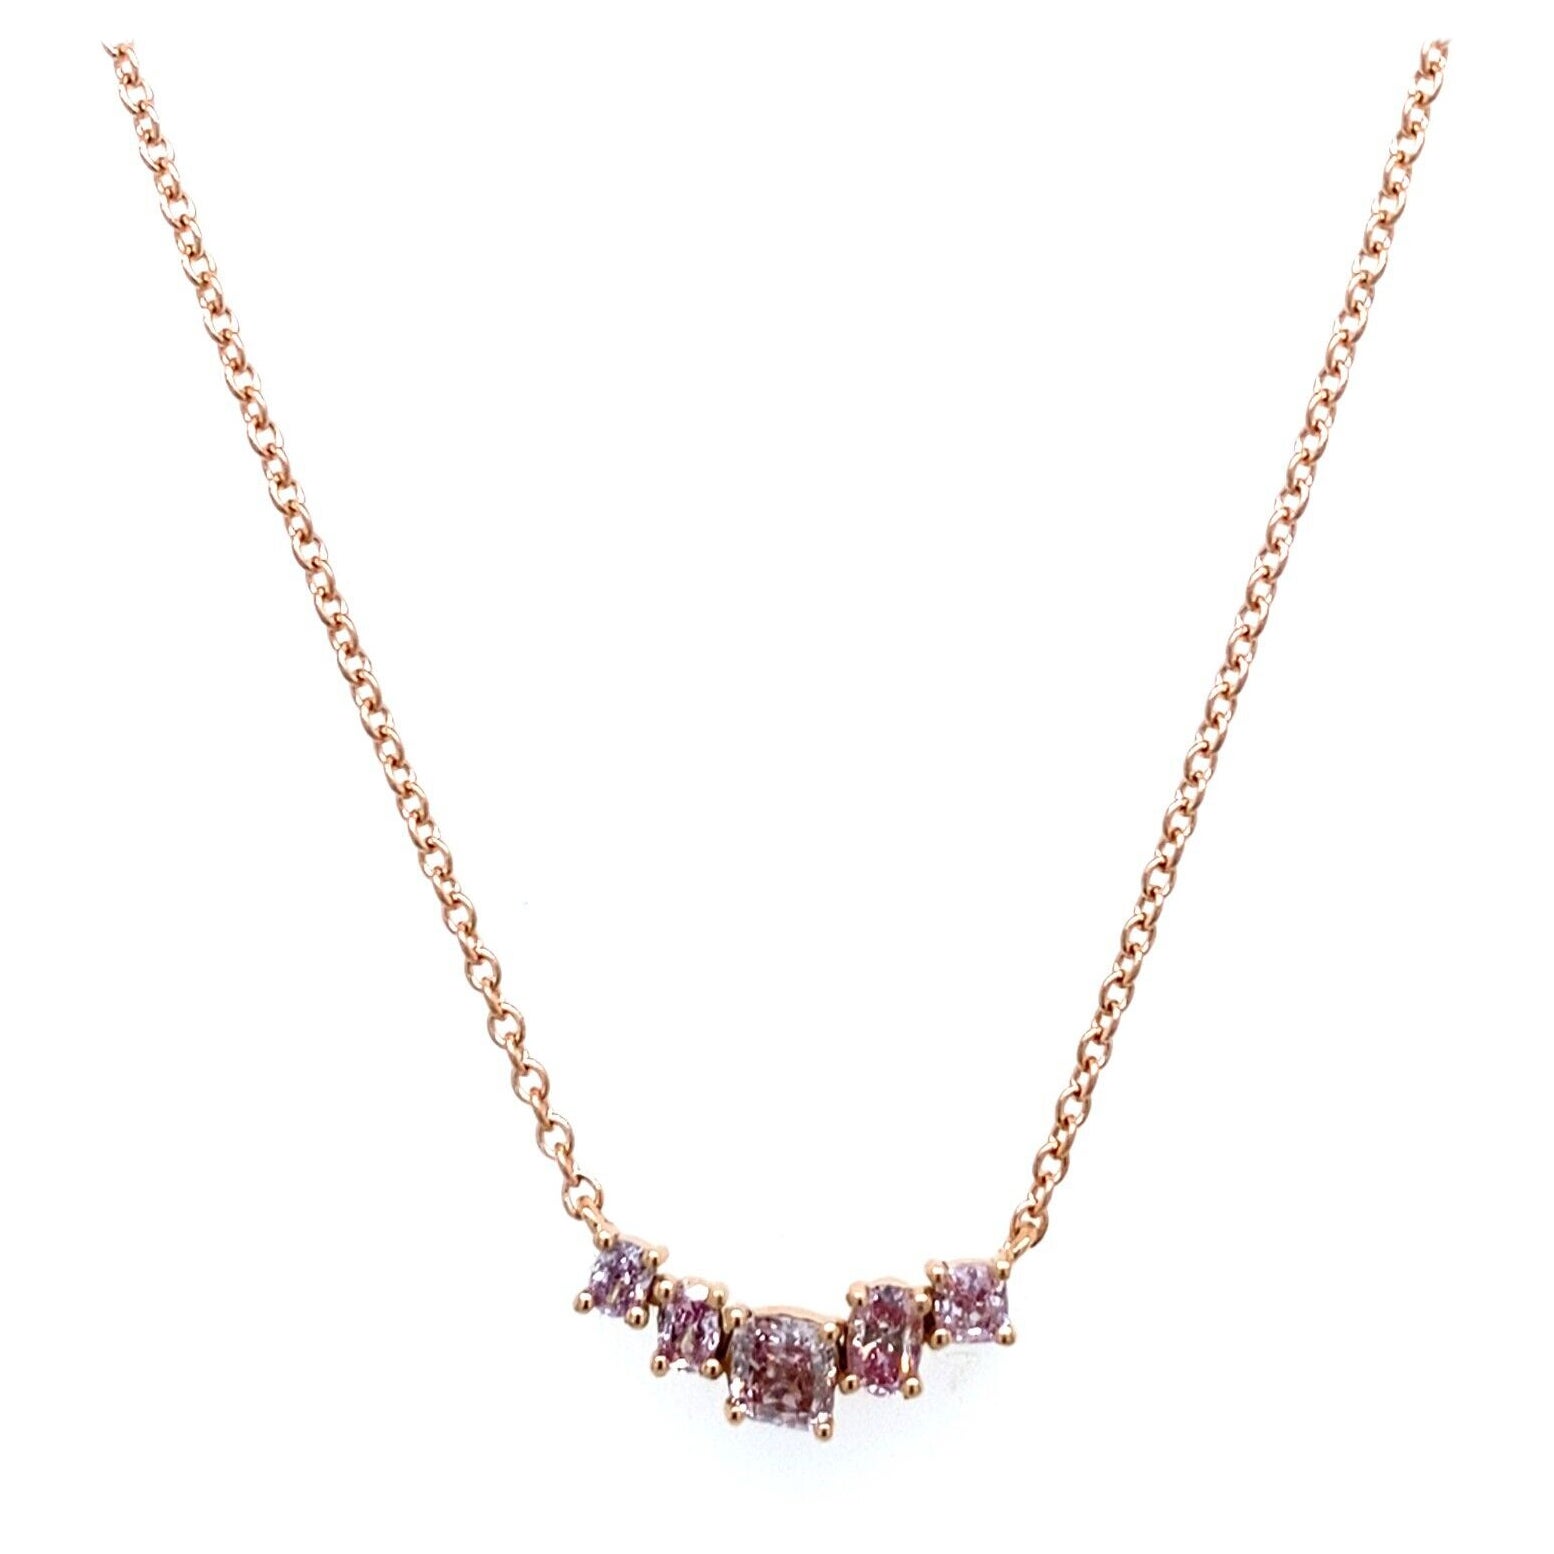 5-Stone Natural Pink Intense Diamond Necklace in 18ct Yellow Gold, 0.25ct